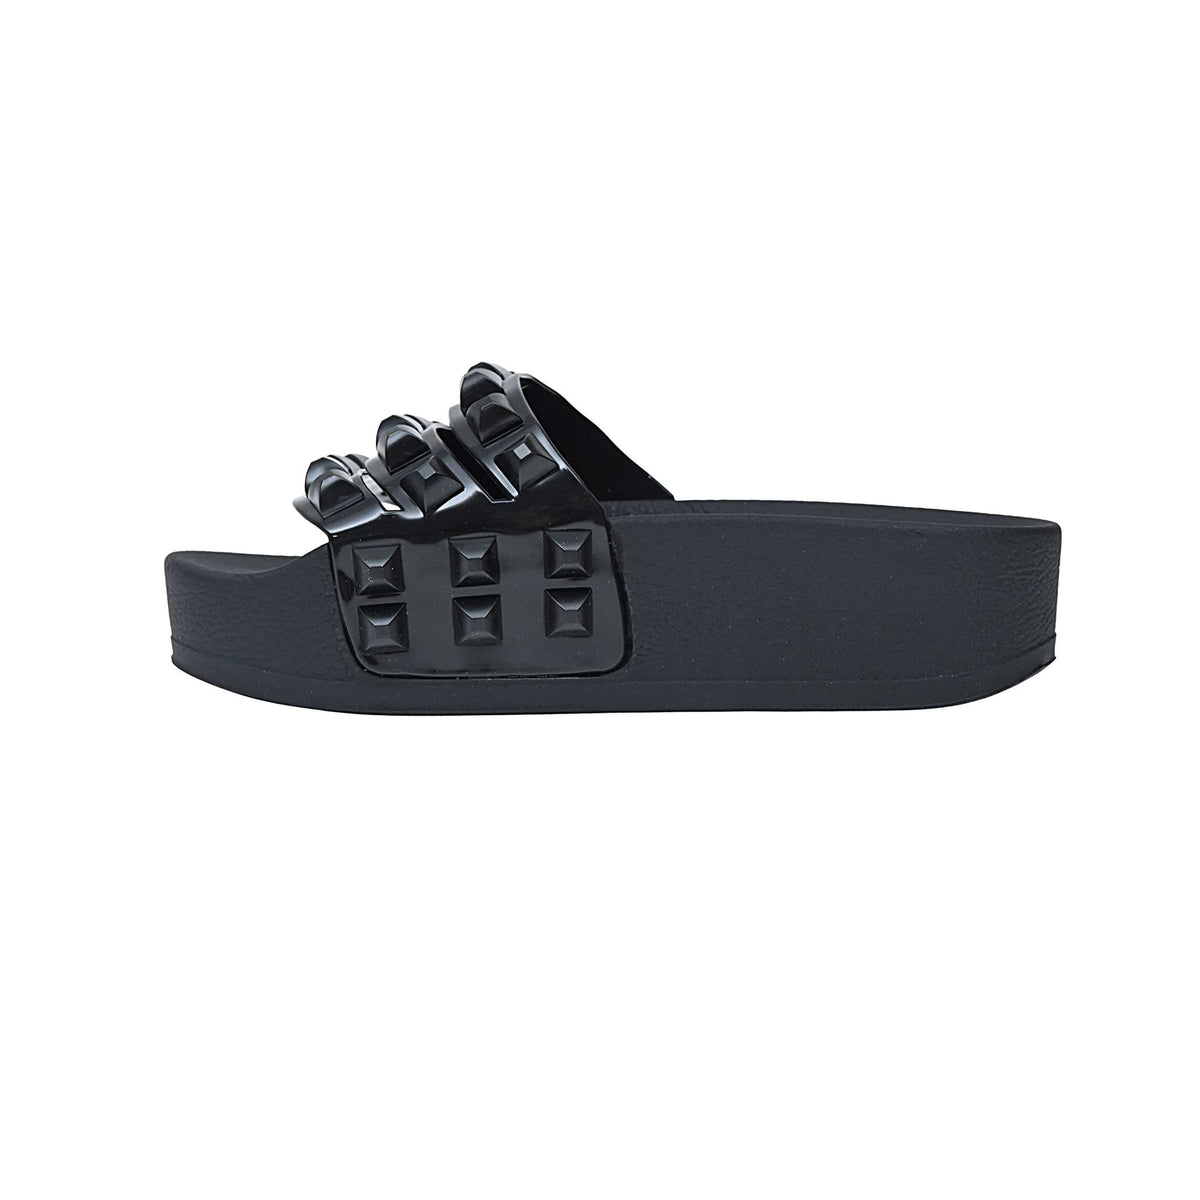 Black platform sandals from Carmen sol. Take your style to new heights with slide sandals